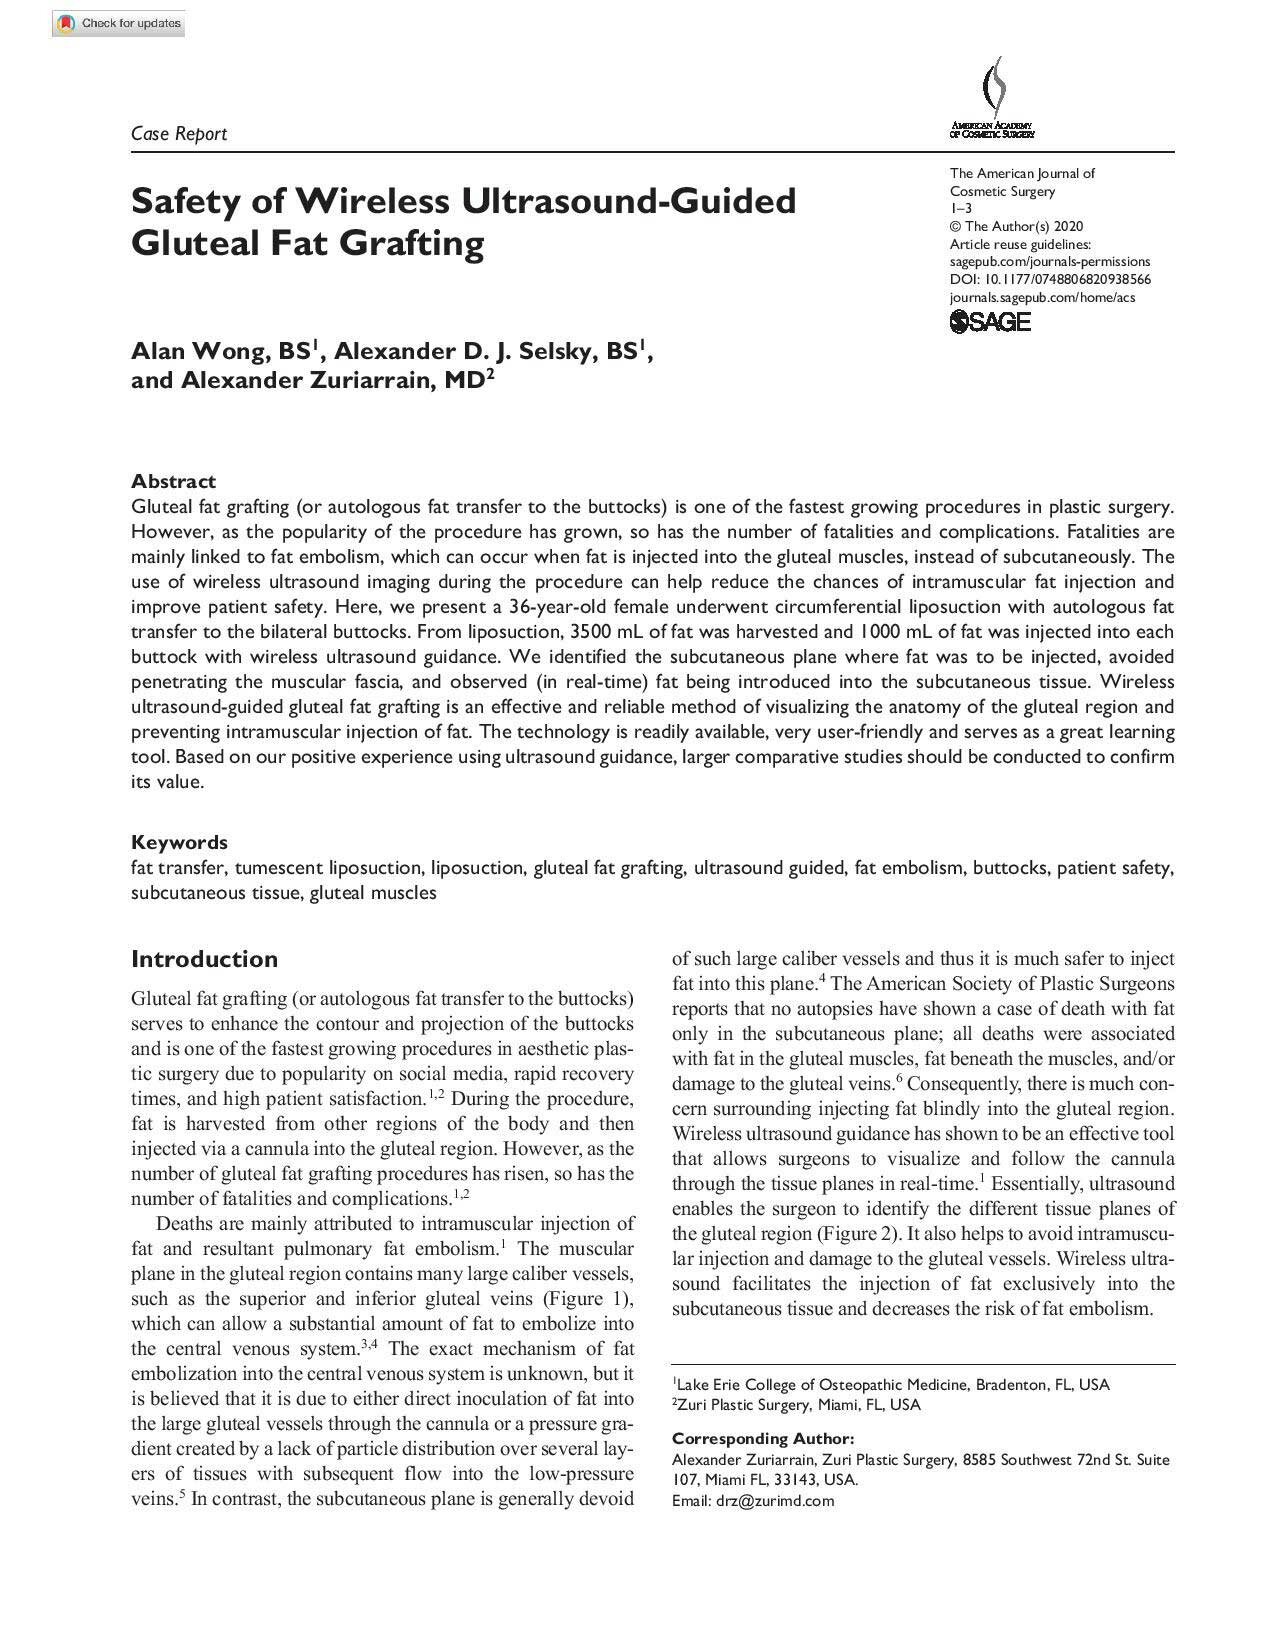 Safety of Wireless Ultrasound-Guided Gluteal Fat Grafting